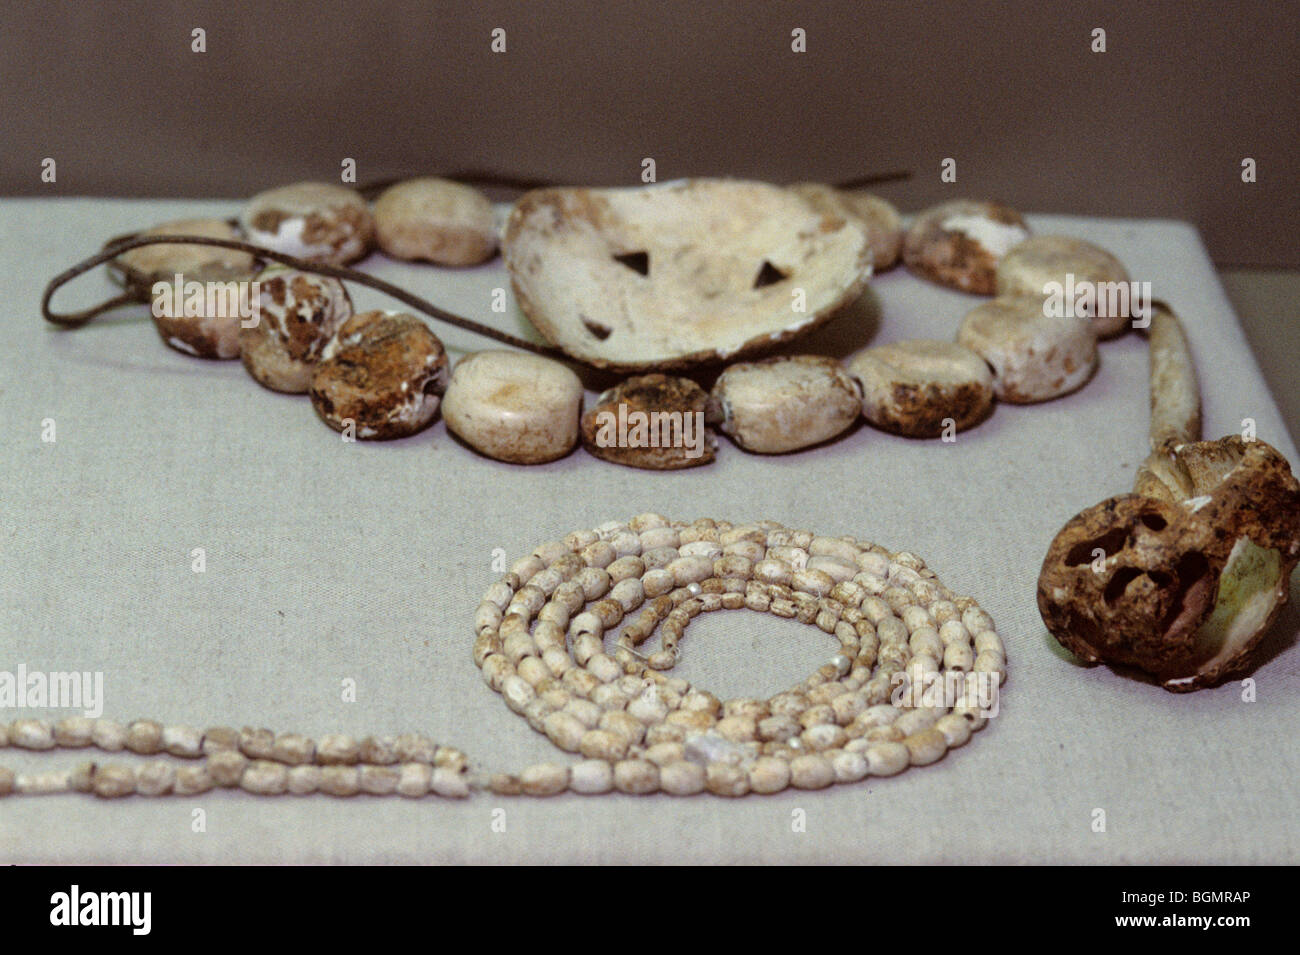 Mississippian Culture beads made from shells used for necklaces and adornment. Etowah Indian Mounds State Historic Site, Cartersville Georgia Stock Photo